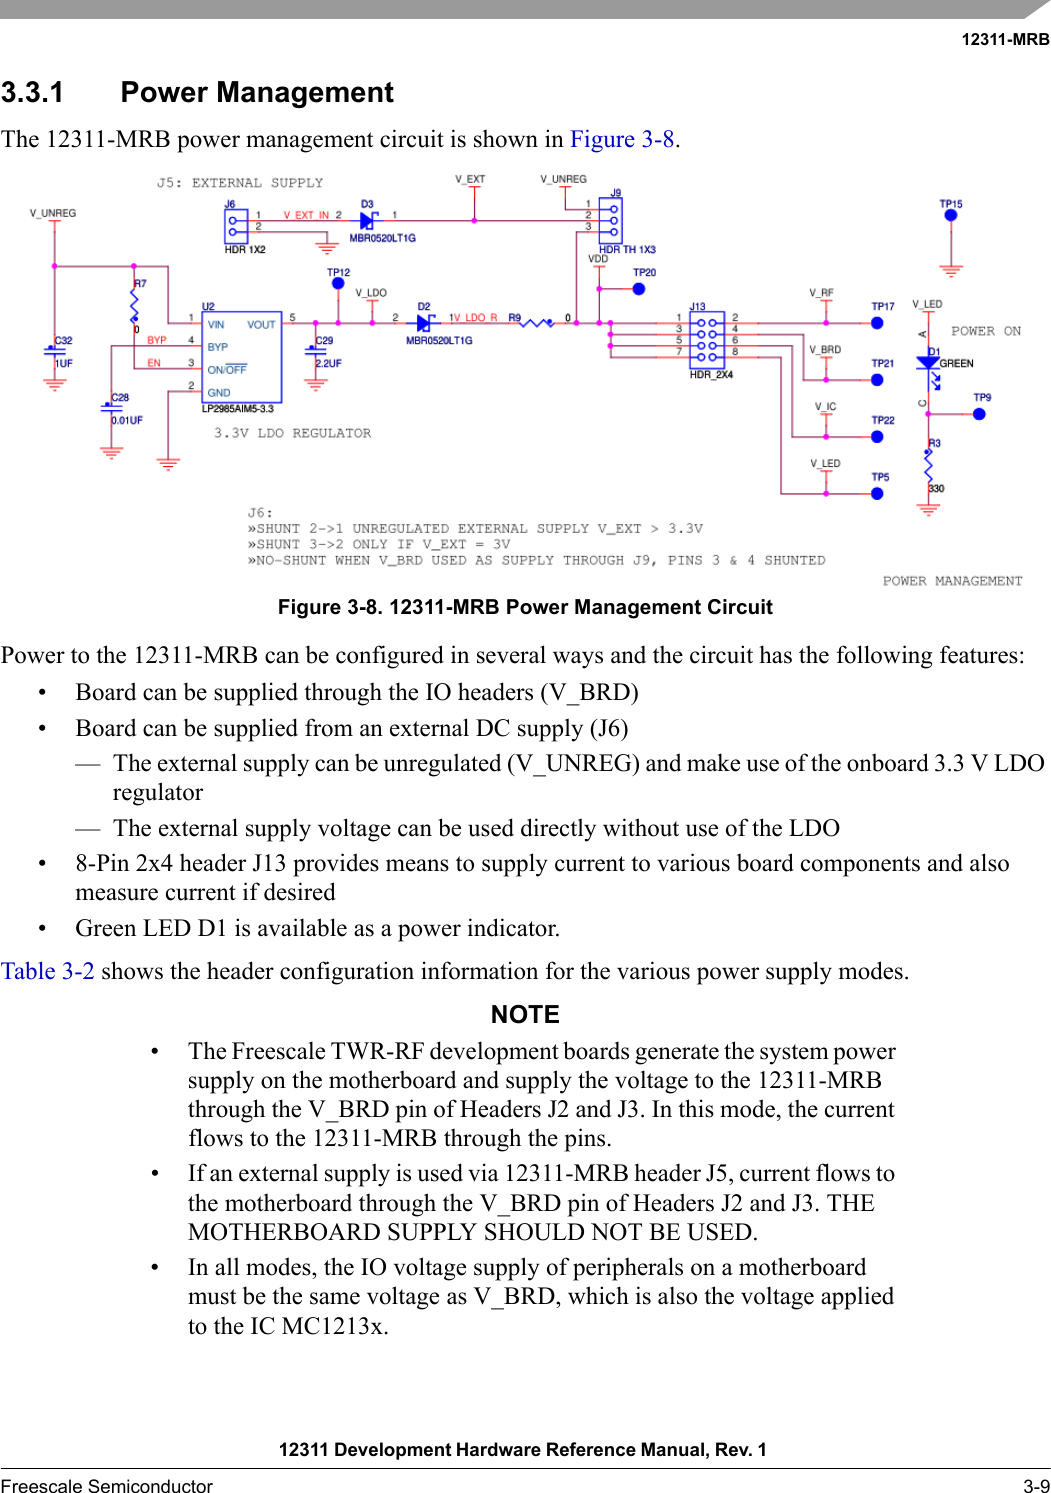 12311-MRB12311 Development Hardware Reference Manual, Rev. 1 Freescale Semiconductor 3-93.3.1 Power ManagementThe 12311-MRB power management circuit is shown in Figure 3-8. Figure 3-8. 12311-MRB Power Management CircuitPower to the 12311-MRB can be configured in several ways and the circuit has the following features:• Board can be supplied through the IO headers (V_BRD)• Board can be supplied from an external DC supply (J6)— The external supply can be unregulated (V_UNREG) and make use of the onboard 3.3 V LDO regulator— The external supply voltage can be used directly without use of the LDO• 8-Pin 2x4 header J13 provides means to supply current to various board components and also measure current if desired• Green LED D1 is available as a power indicator.Table 3-2 shows the header configuration information for the various power supply modes.NOTE• The Freescale TWR-RF development boards generate the system power supply on the motherboard and supply the voltage to the 12311-MRB through the V_BRD pin of Headers J2 and J3. In this mode, the current flows to the 12311-MRB through the pins.• If an external supply is used via 12311-MRB header J5, current flows to the motherboard through the V_BRD pin of Headers J2 and J3. THE MOTHERBOARD SUPPLY SHOULD NOT BE USED.• In all modes, the IO voltage supply of peripherals on a motherboard must be the same voltage as V_BRD, which is also the voltage applied to the IC MC1213x.